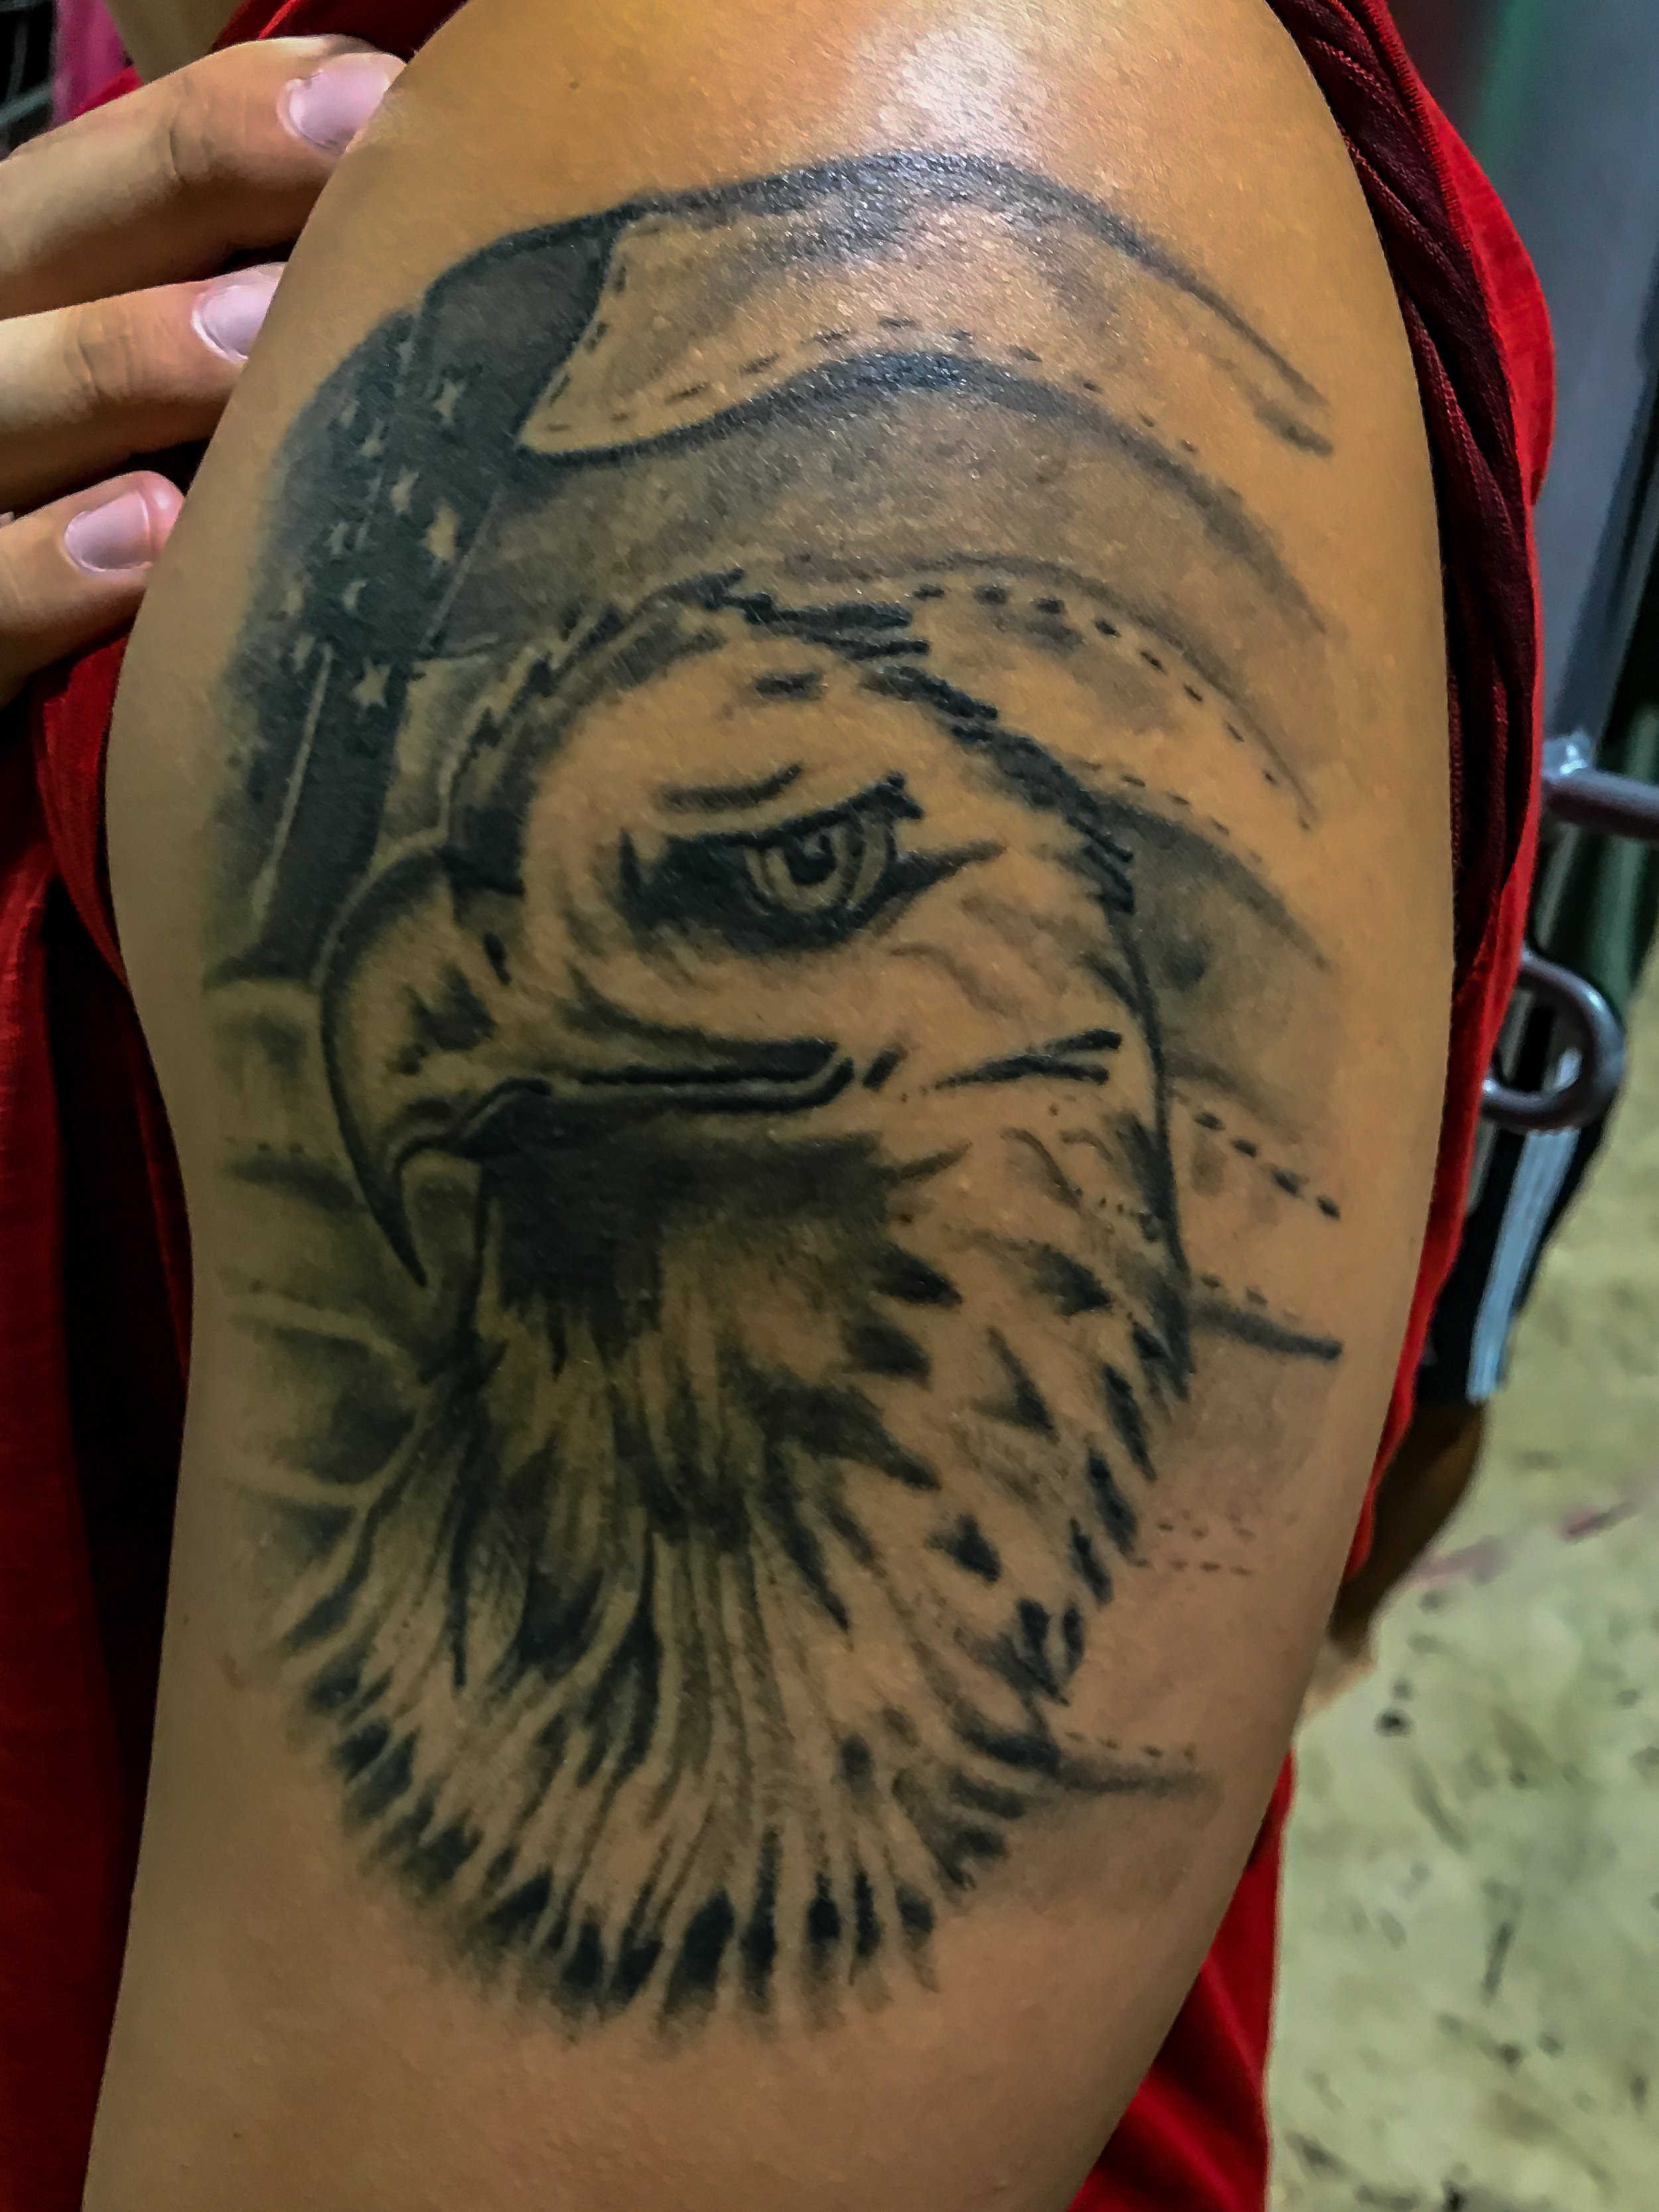 This is one of Ian Baileys tattoos. It is an eagle head in front of the American flag. This symbolizes his character and passion. Bailey likes to be alone but has the character to protect all. Which leads into the American flag which symbolizes pow